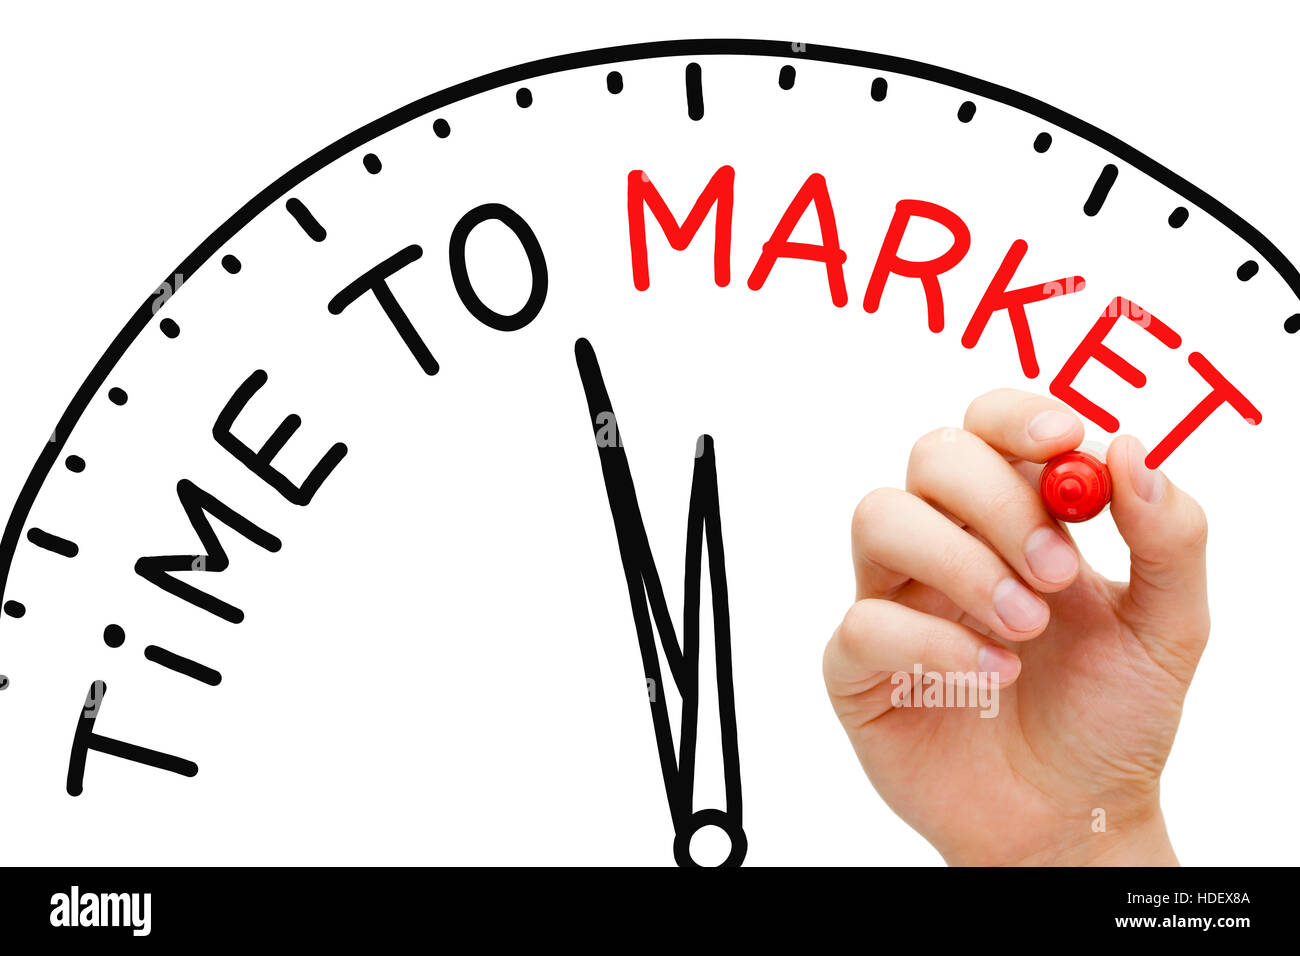 Writing time. Time to Market. Сокращение time to Market. Time to Market иконка. Презентация time to Market.